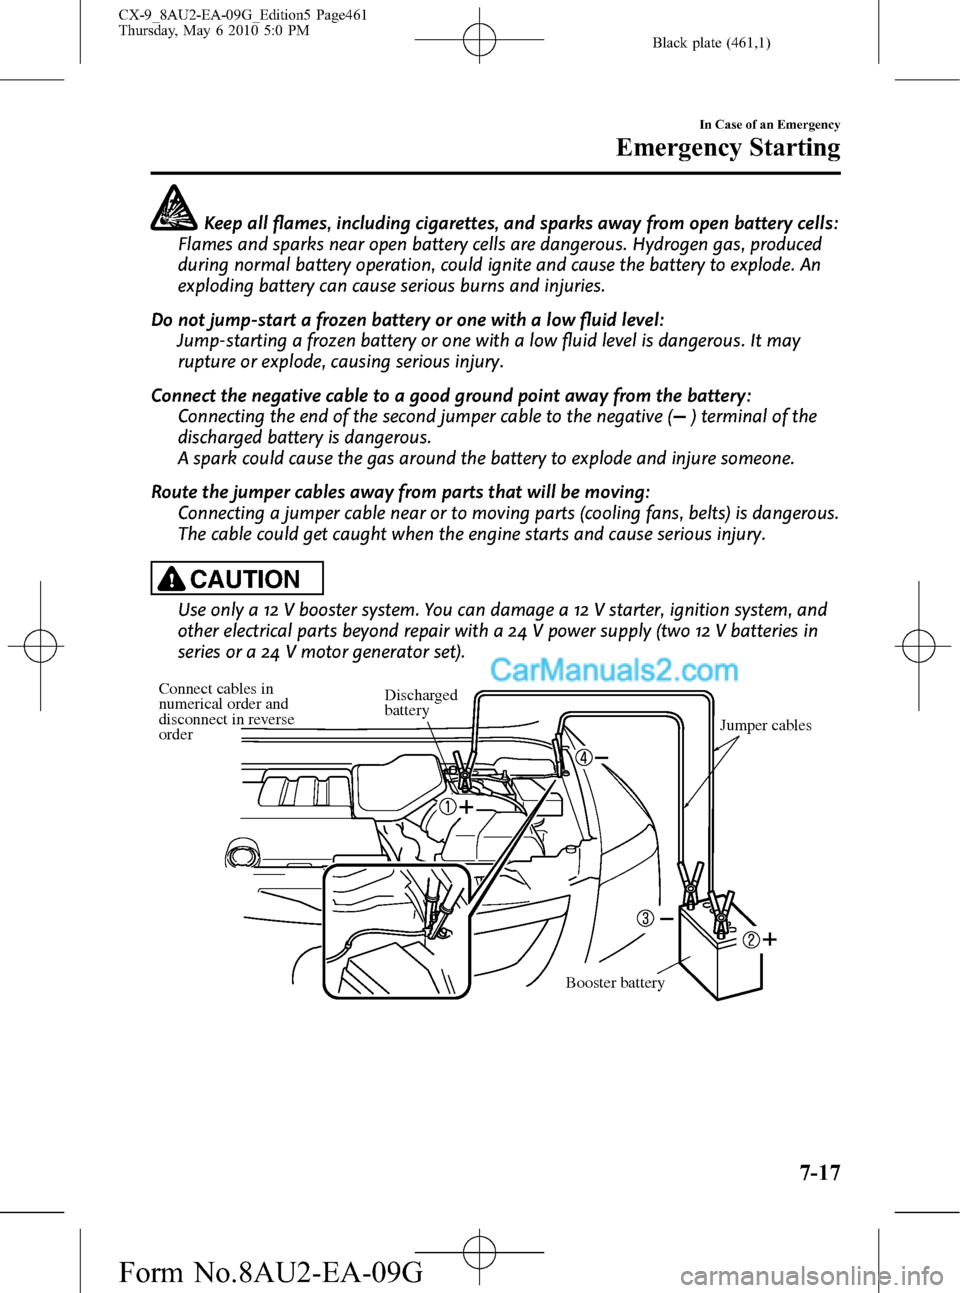 MAZDA MODEL CX-9 2010  Owners Manual (in English) Black plate (461,1)
Keep all flames, including cigarettes, and sparks away from open battery cells:
Flames and sparks near open battery cells are dangerous. Hydrogen gas, produced
during normal batter